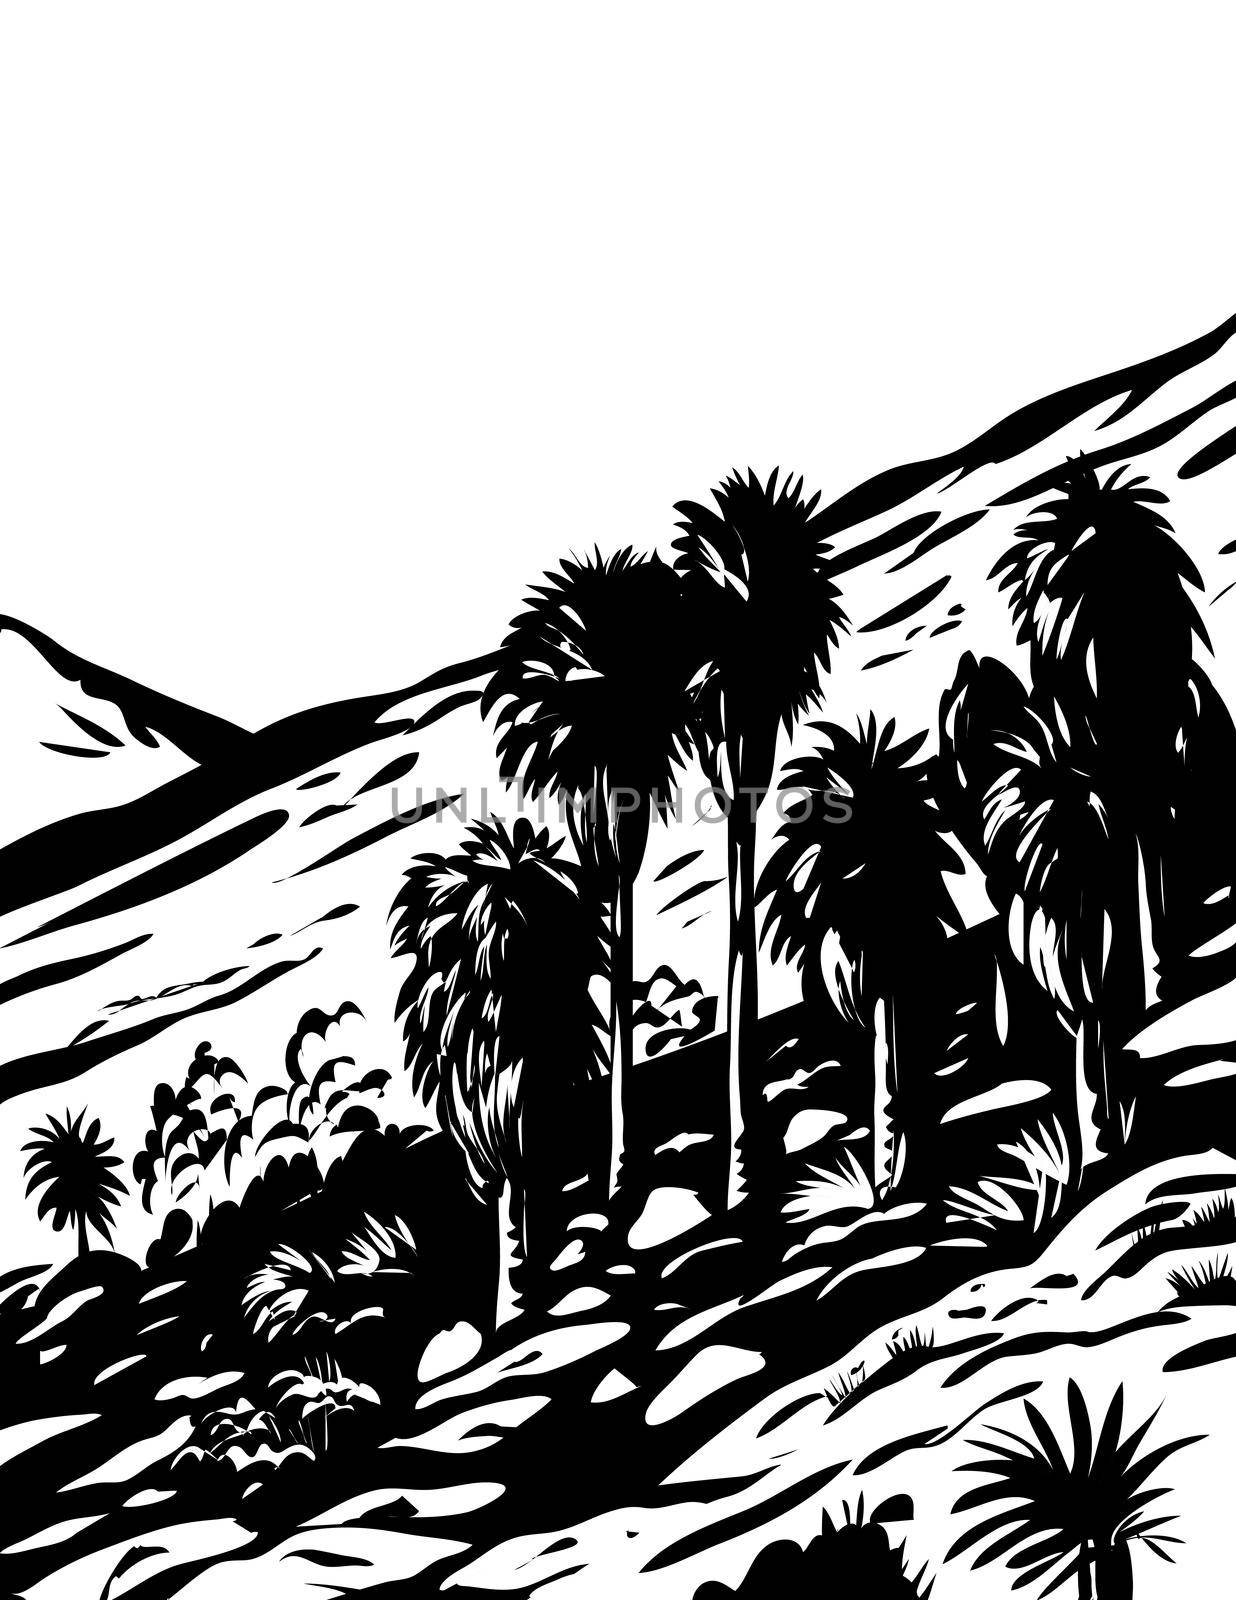 WPA woodcut poster art of Fortynine Palms Oasis Trail on the north end of Joshua Tree National Park, California USA done in works project administration black and white style.